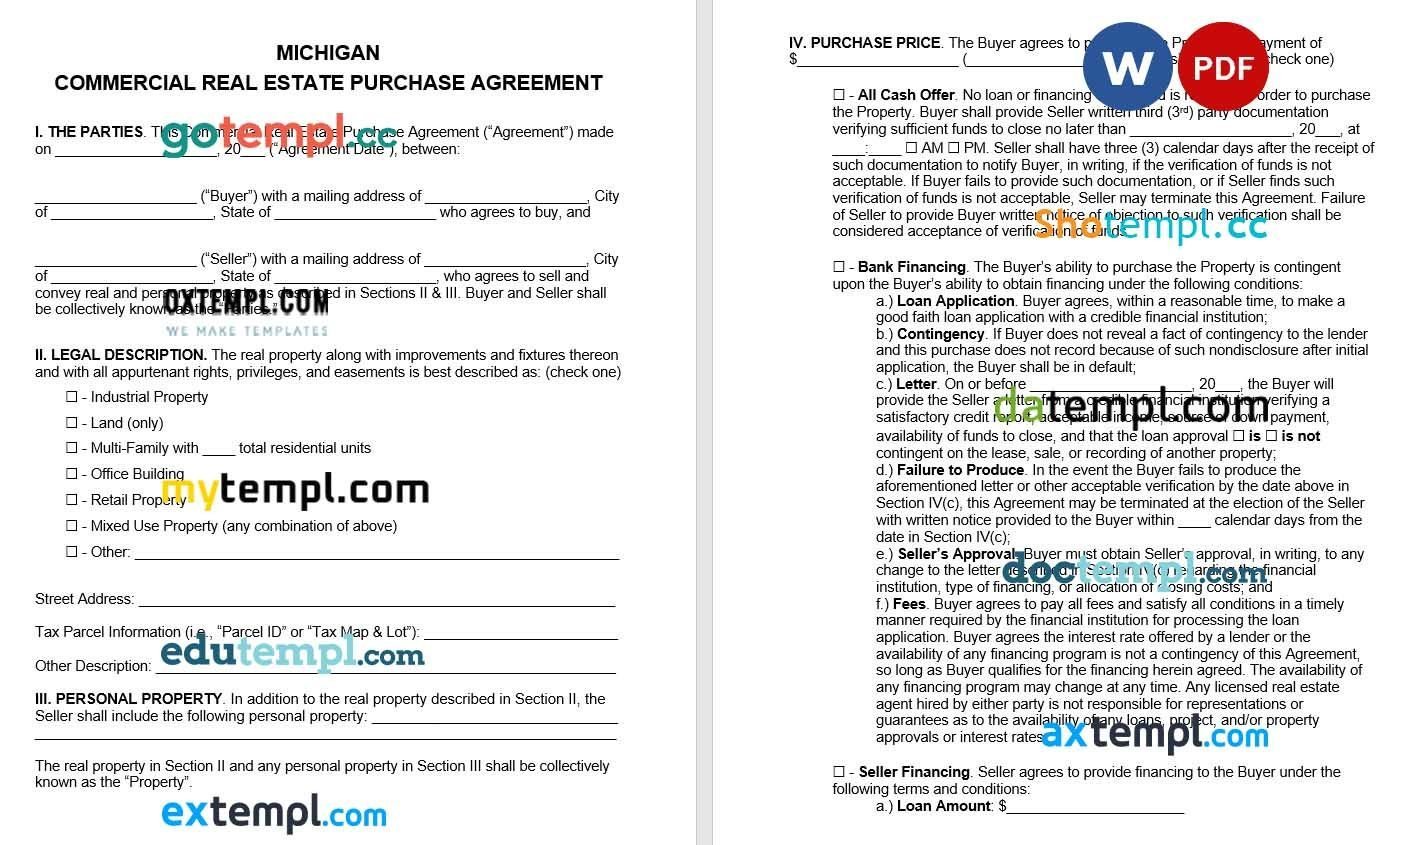 Michigan Commercial Real Estate Purchase Agreement Word example